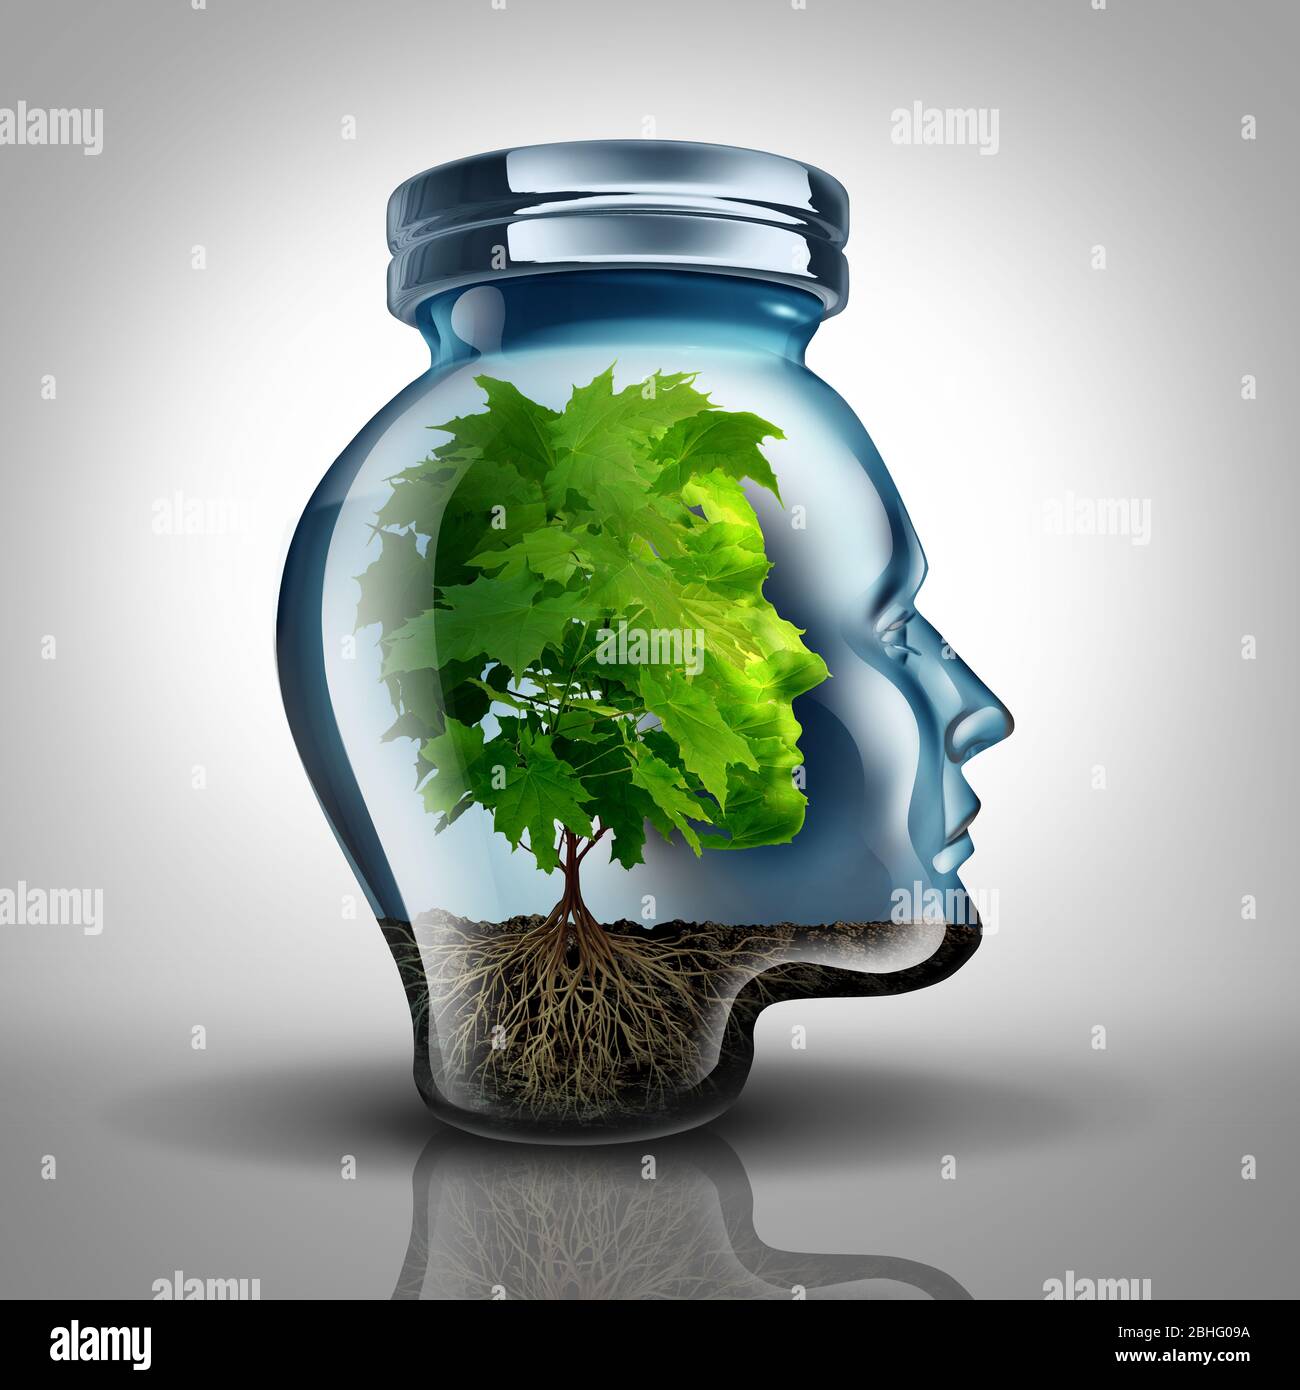 Inner growth psychology concept and personal development idea as a glass jar shaped as a human head with a tree inside representing mental health. Stock Photo